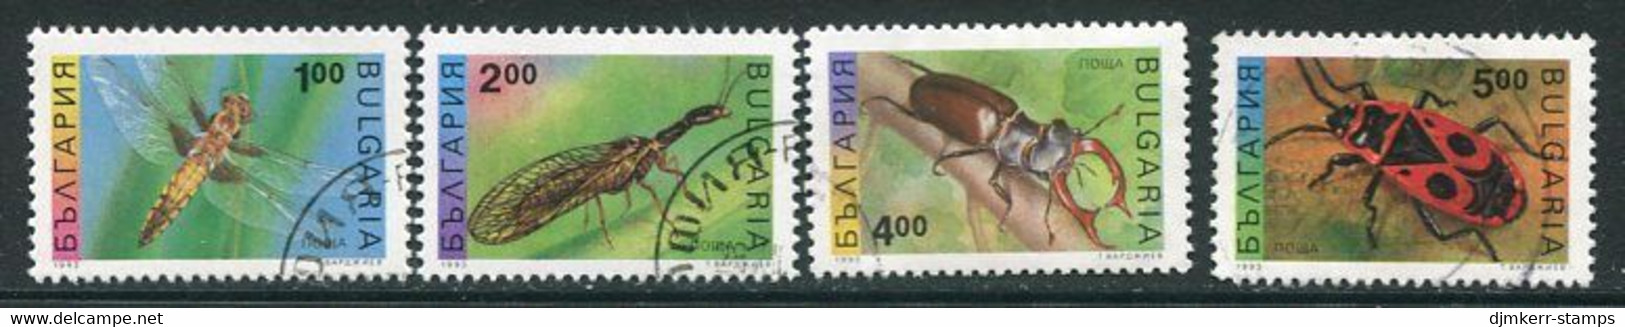 BULGARIA  1993 Defibitive: Insects Used.  Michel 4093-96 - Gebraucht